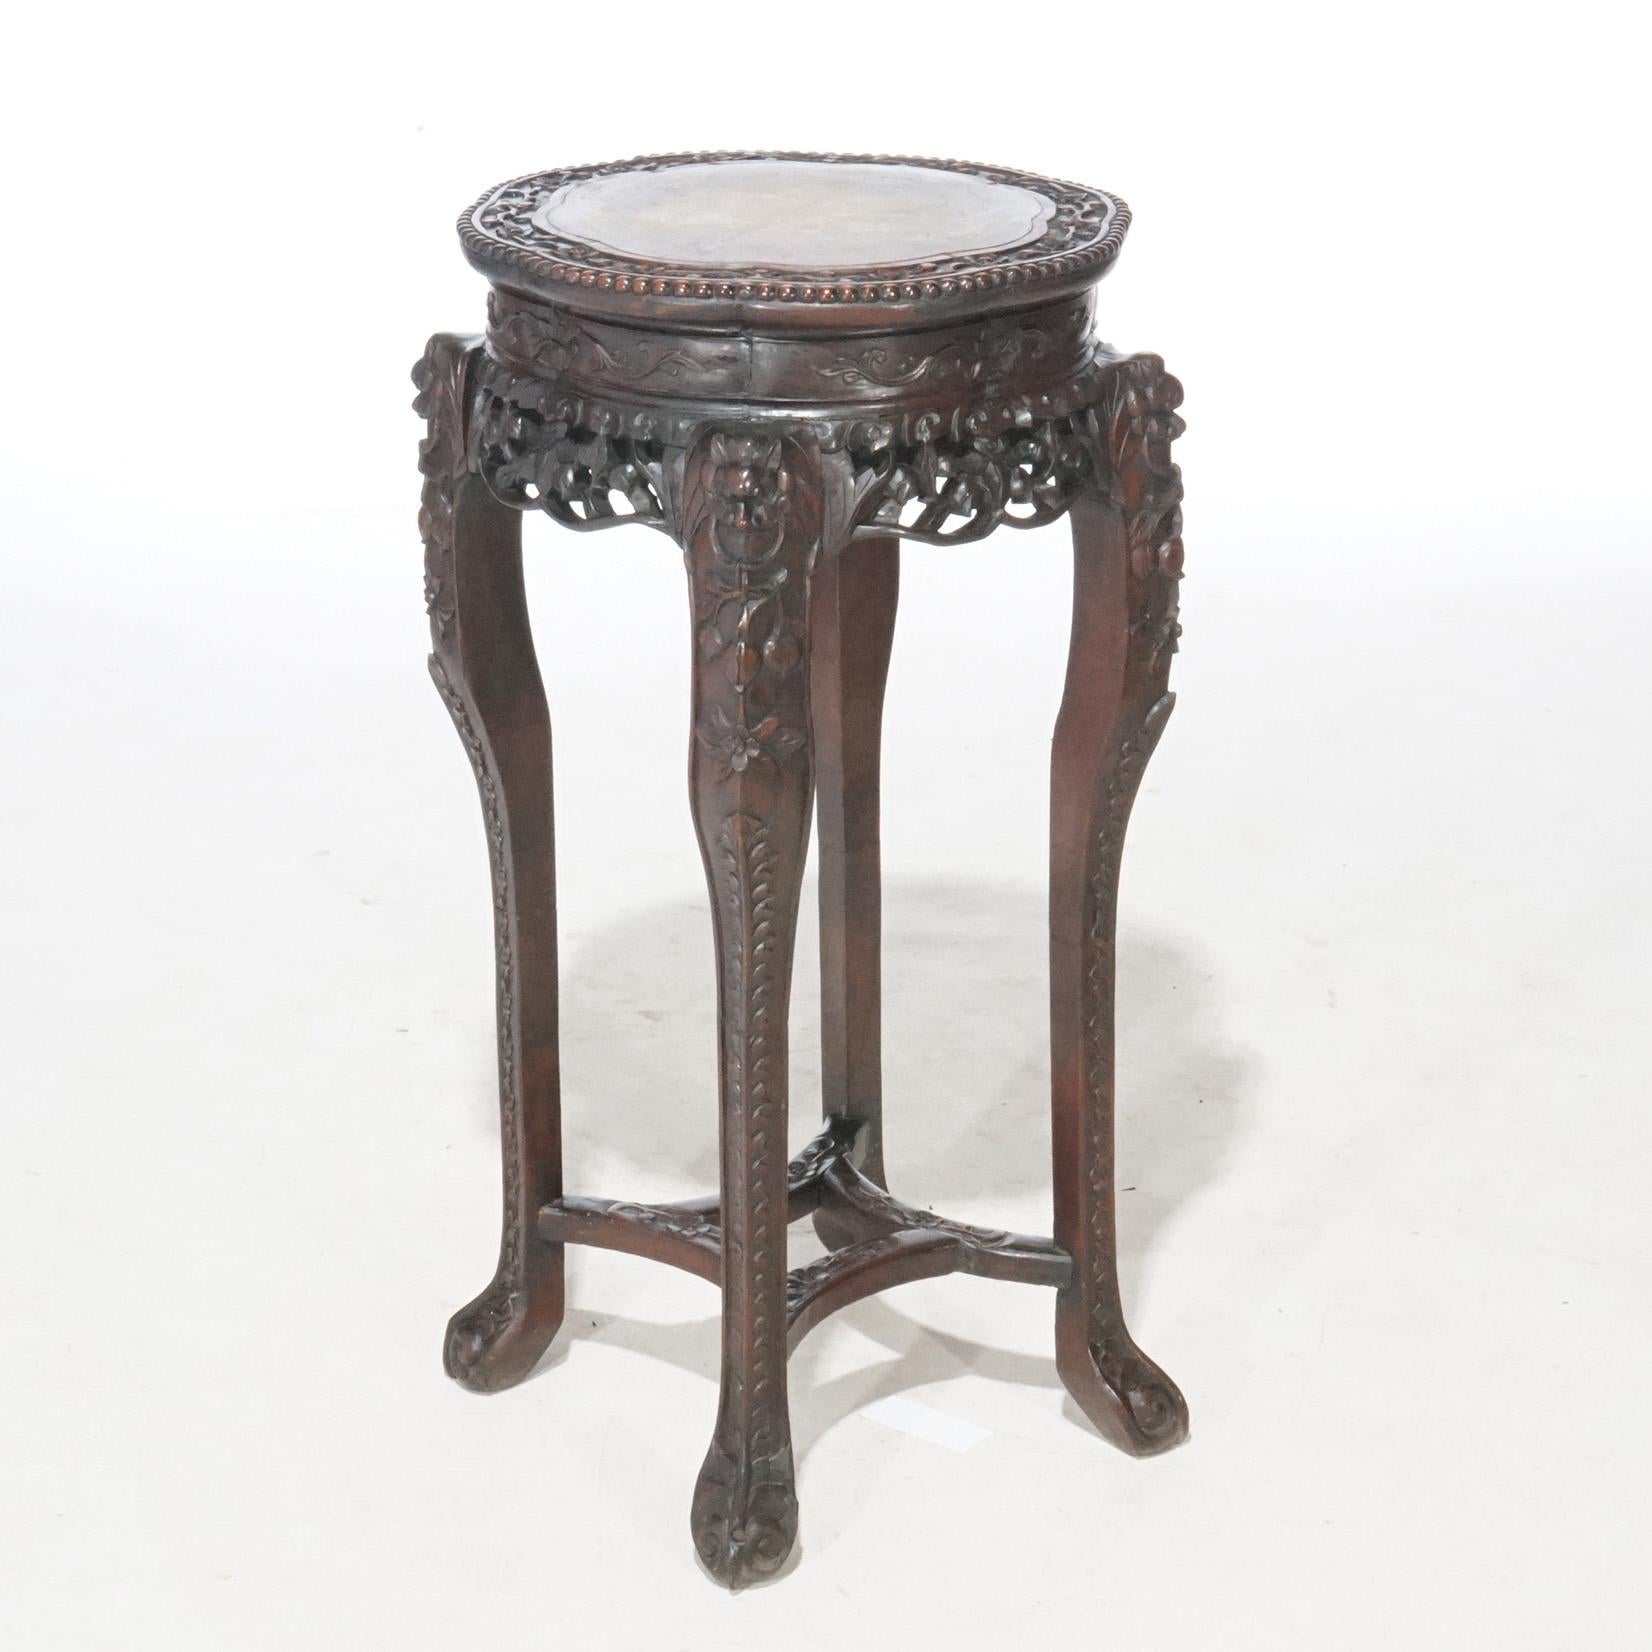 An antique Chinese fern stand offers rosewood construction with inset marble top over foliate carved base, circa 1920

Measures - 35.25